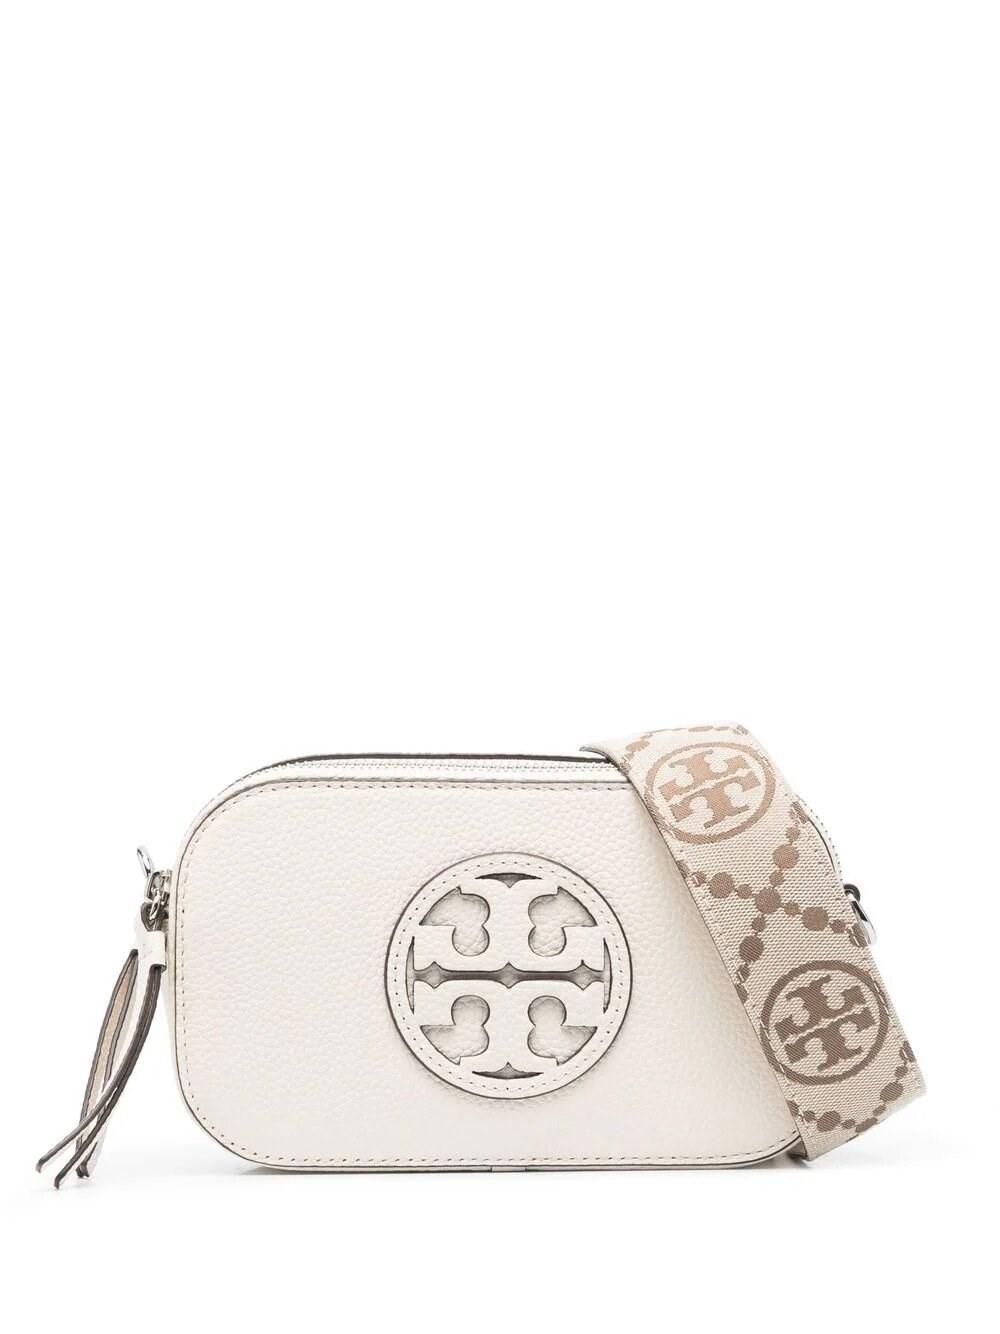 Tory Burch Mini Miller Leather Crossbody Bag in Natural | Lyst